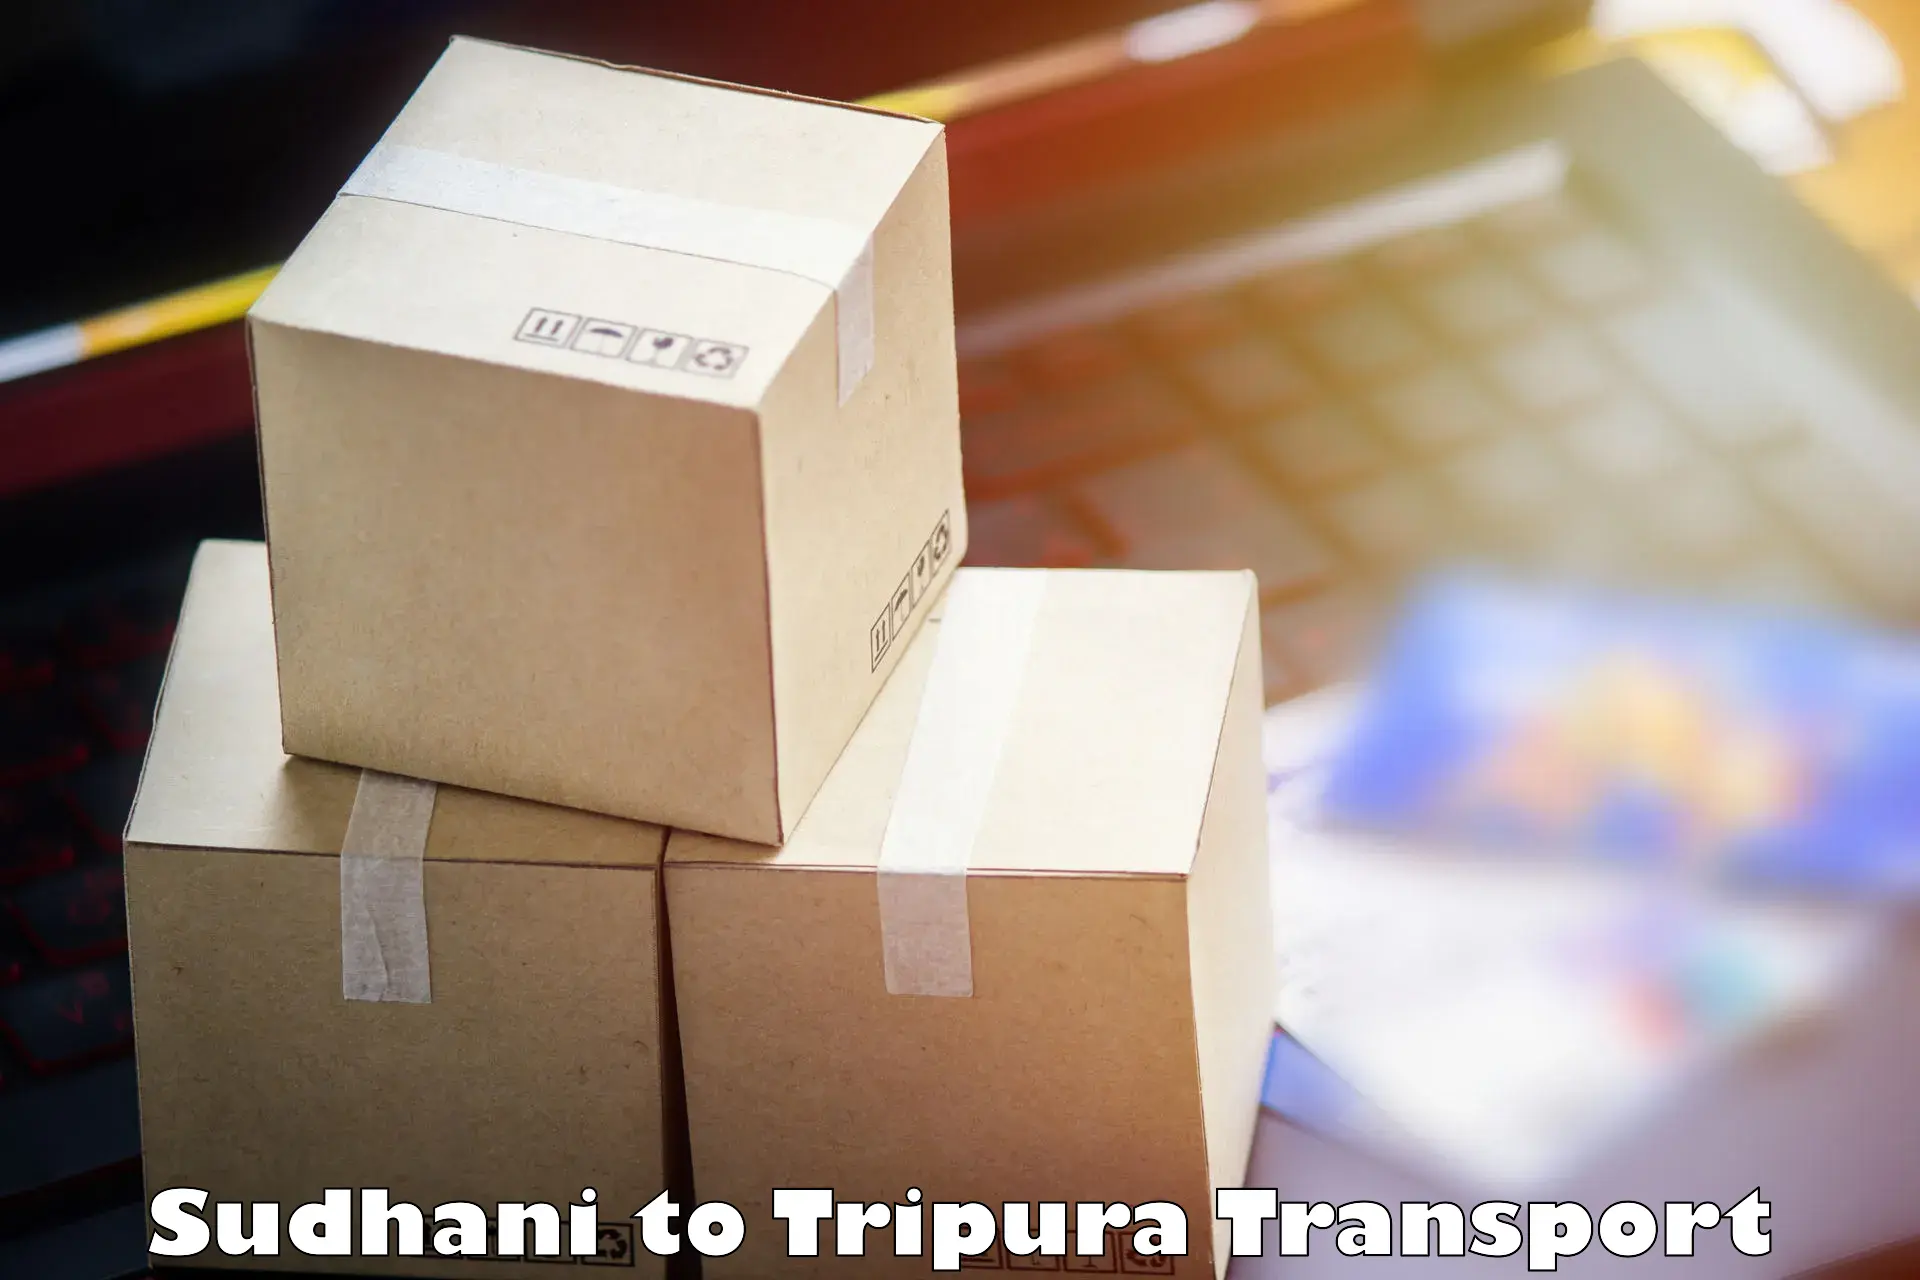 Container transport service Sudhani to Dharmanagar